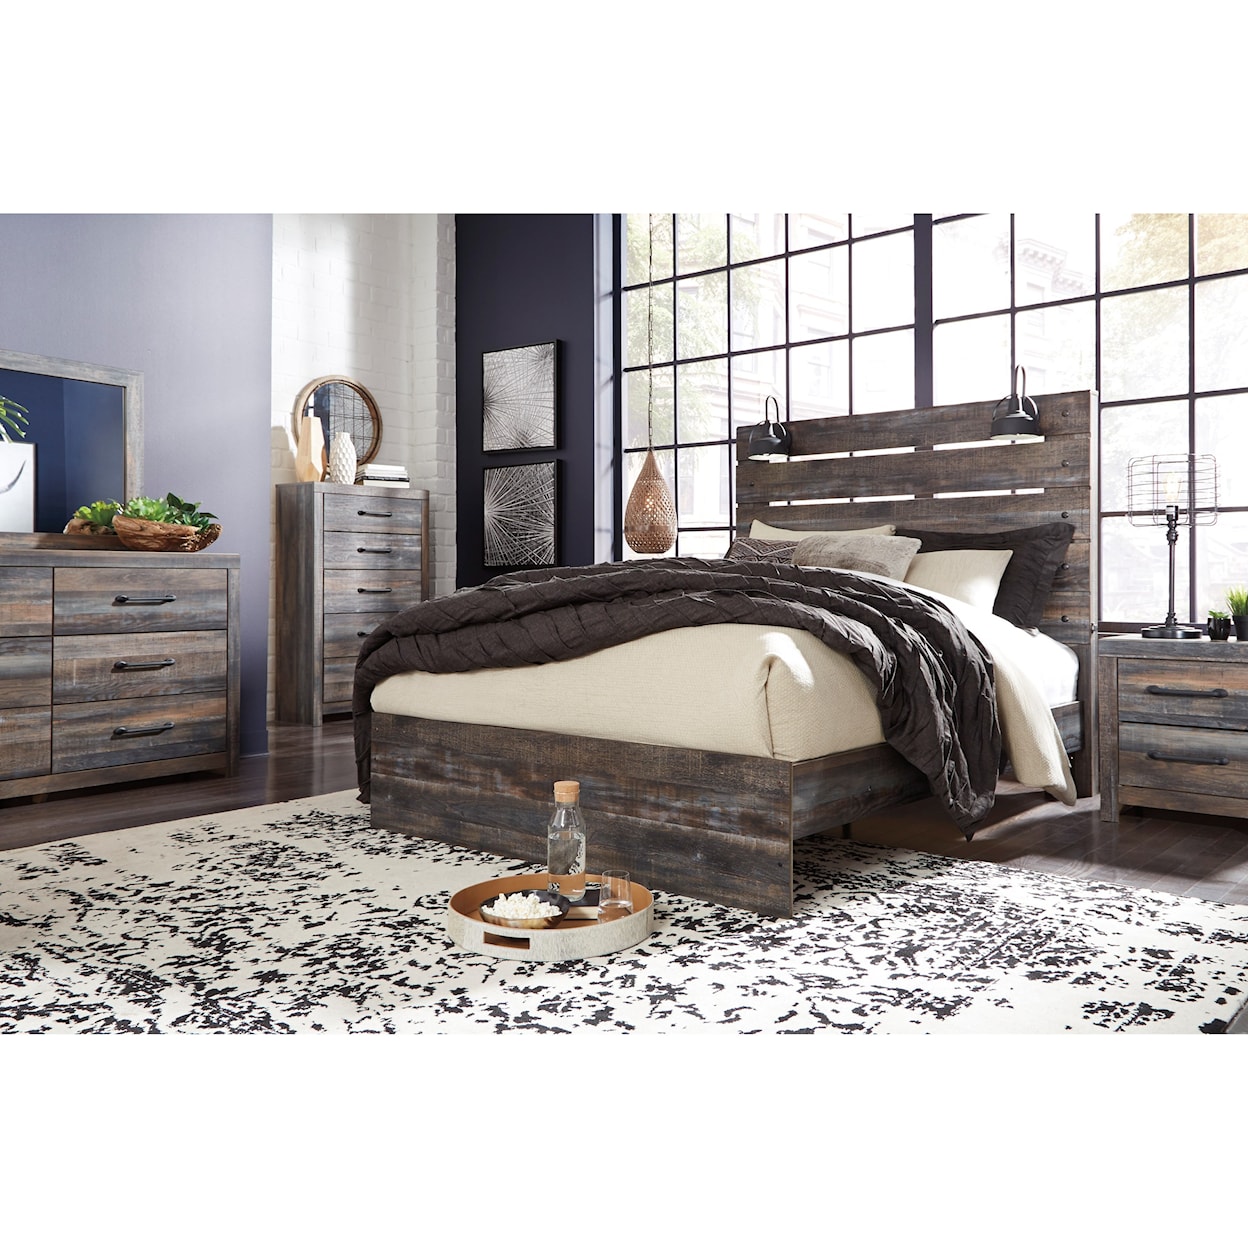 Signature Design by Ashley Drystan 7pc Queen Bedroom Group